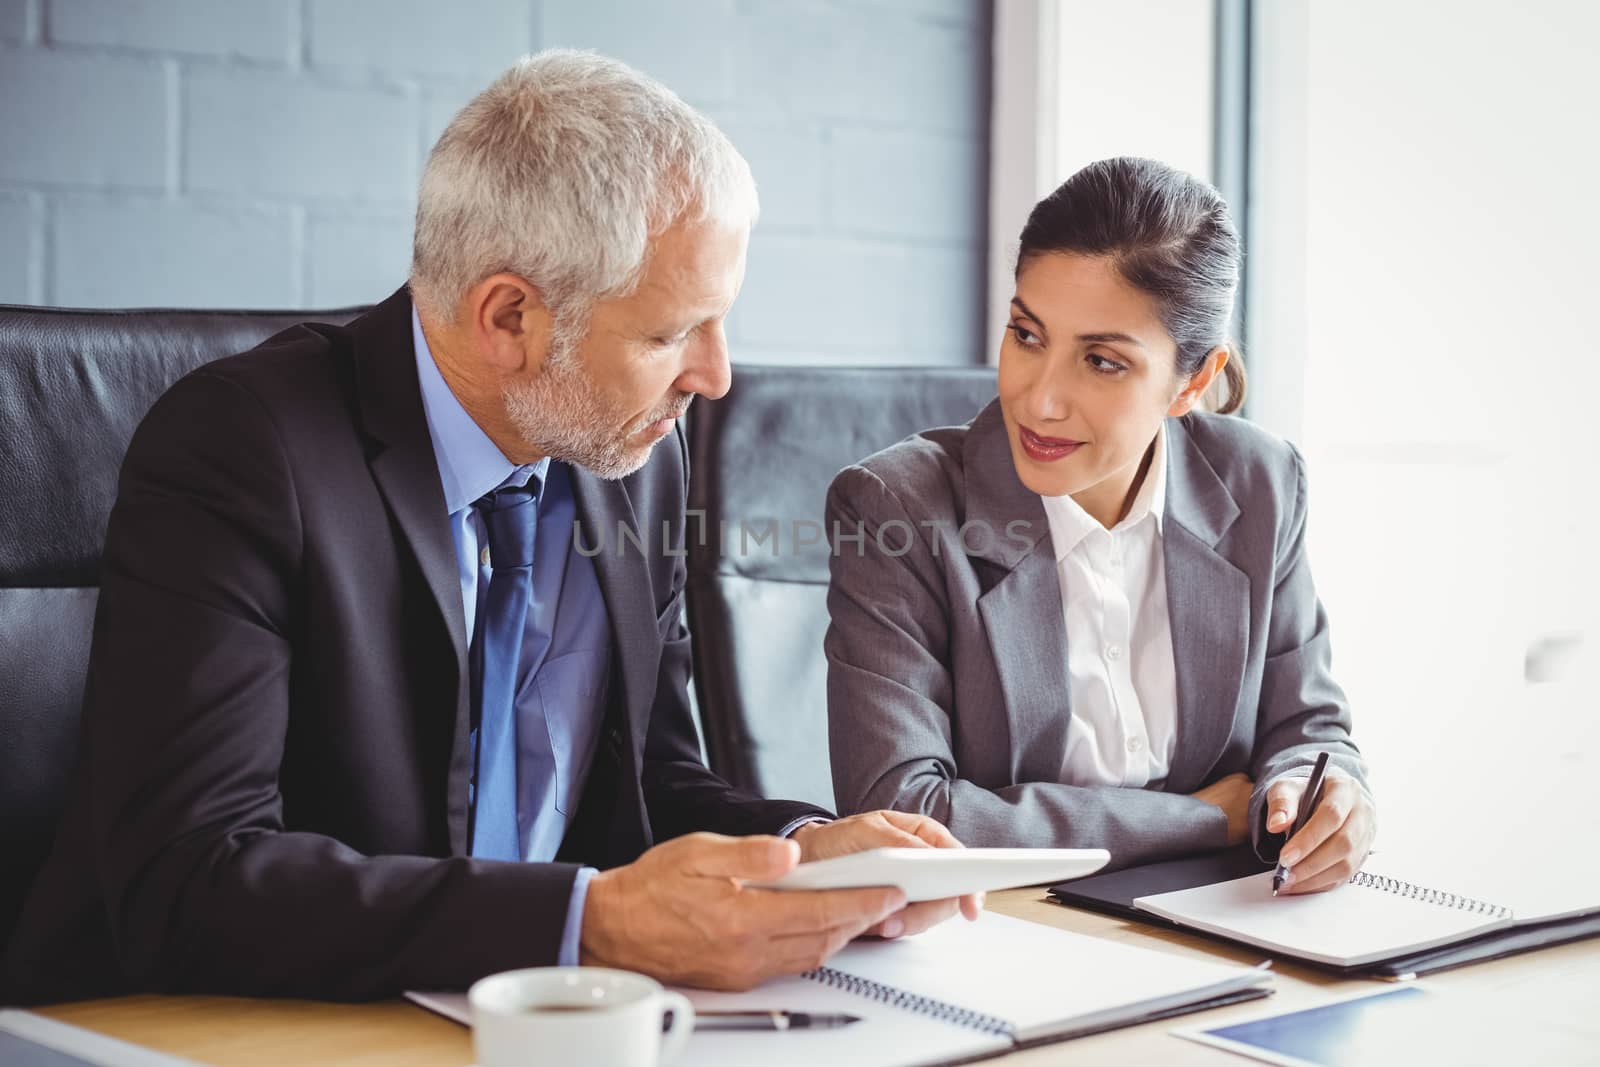 Businessman and businesswoman interacting in conference room